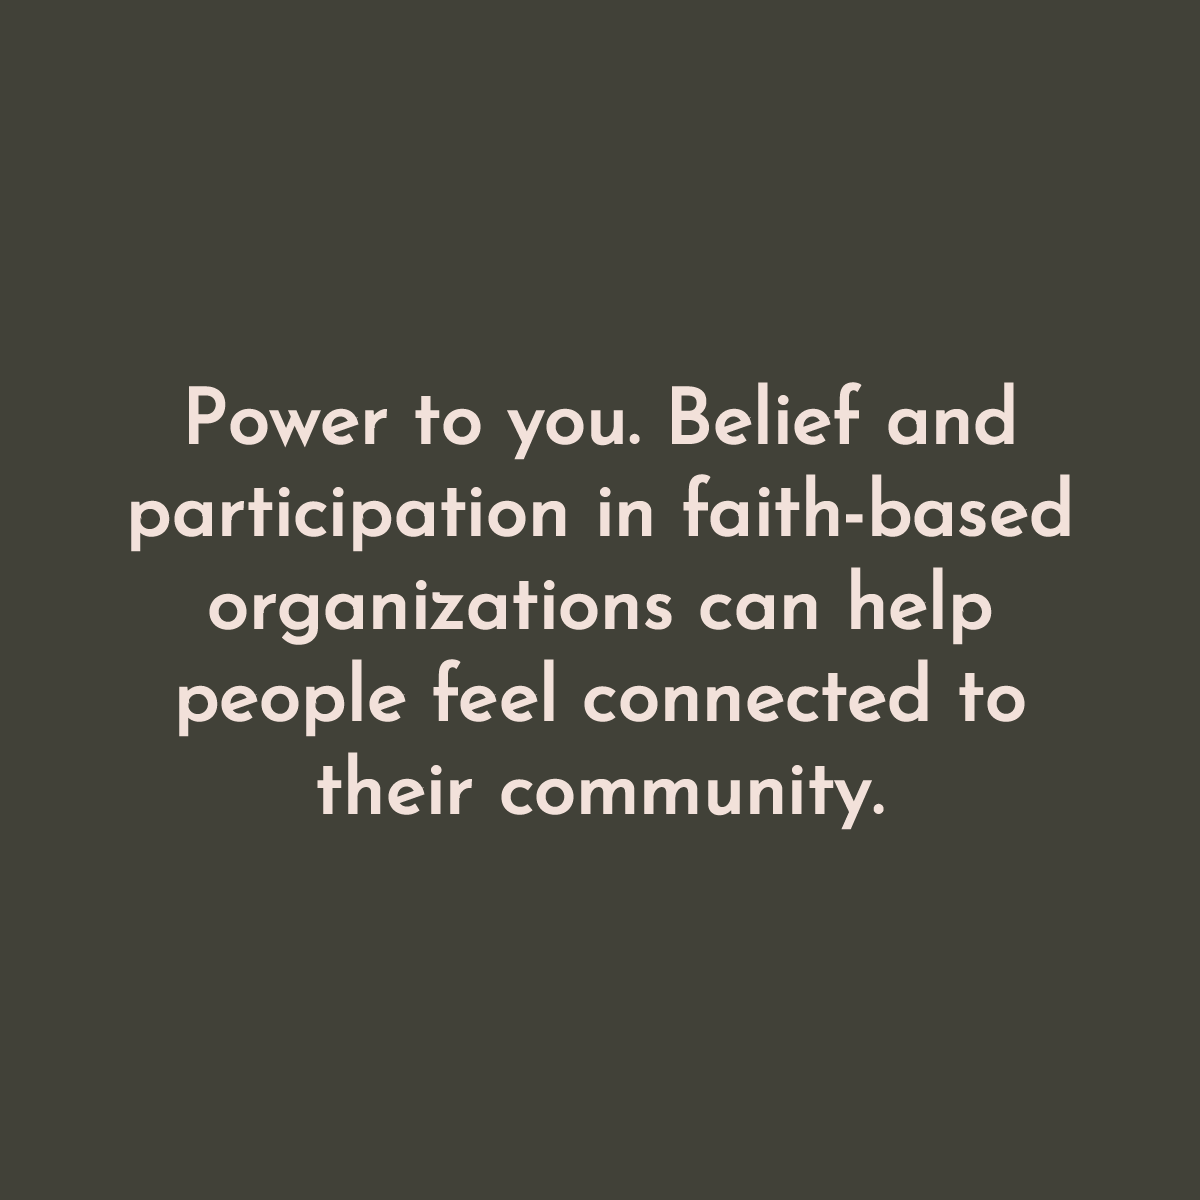 Power to you. Belief and participation in faith-based organizations can help people feel connected to their community.